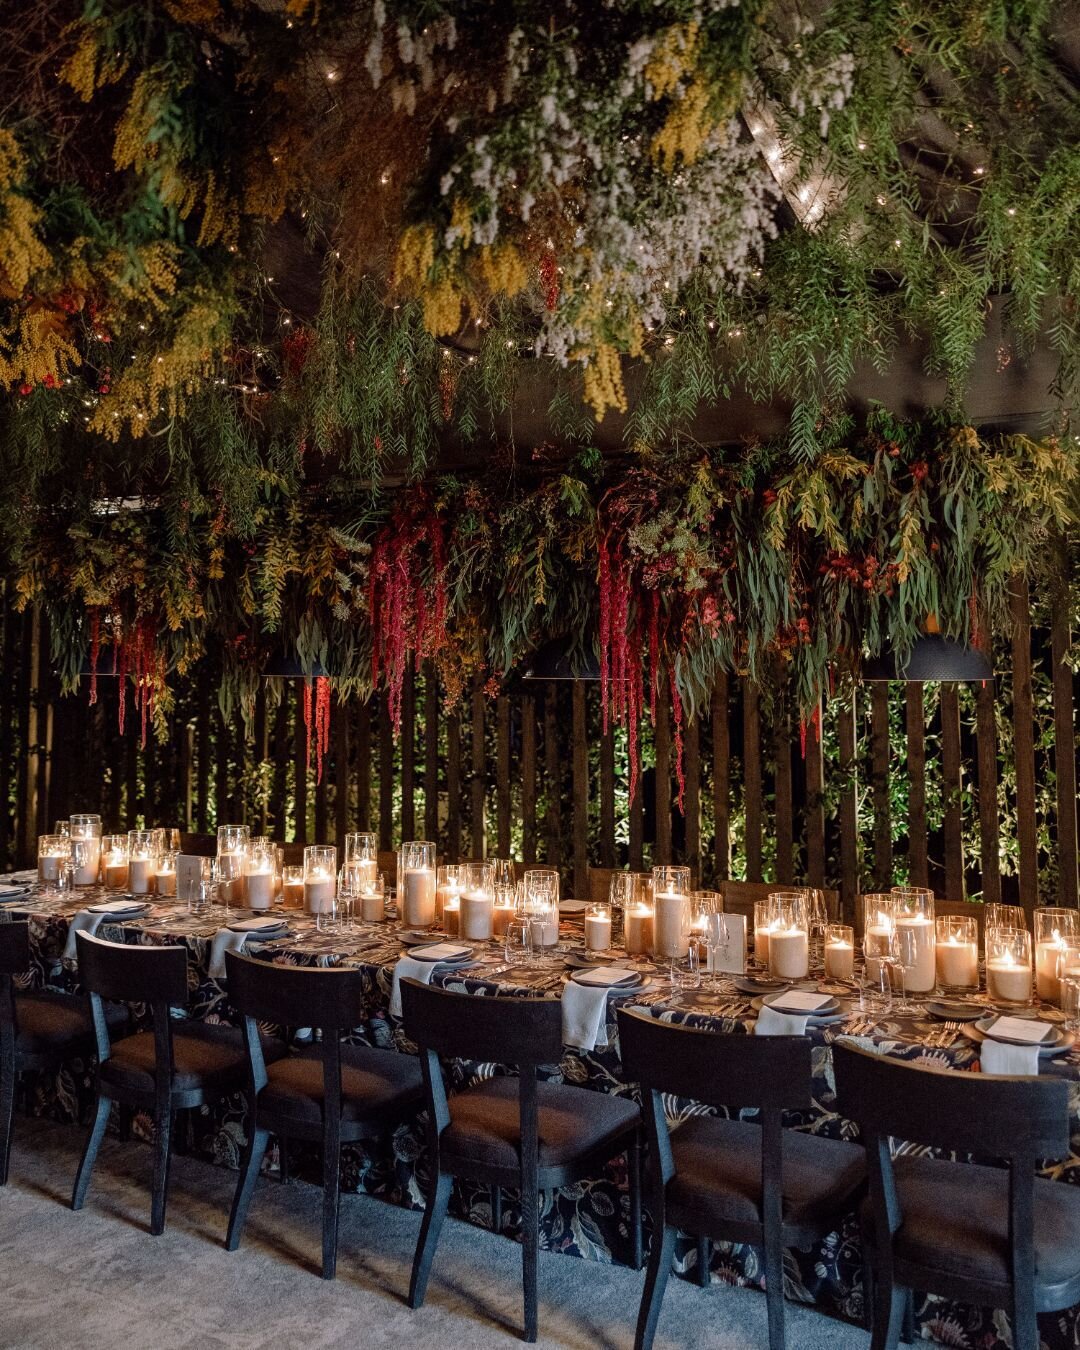 Our grand finale of the trip was held at the Rosewood Ballroom, where a cascading trail of flickering candle votives from @vogue.candles welcomed guests into an intimate private dinner space 🕯️ The @bellavistadesigns team crafted a custom build usin